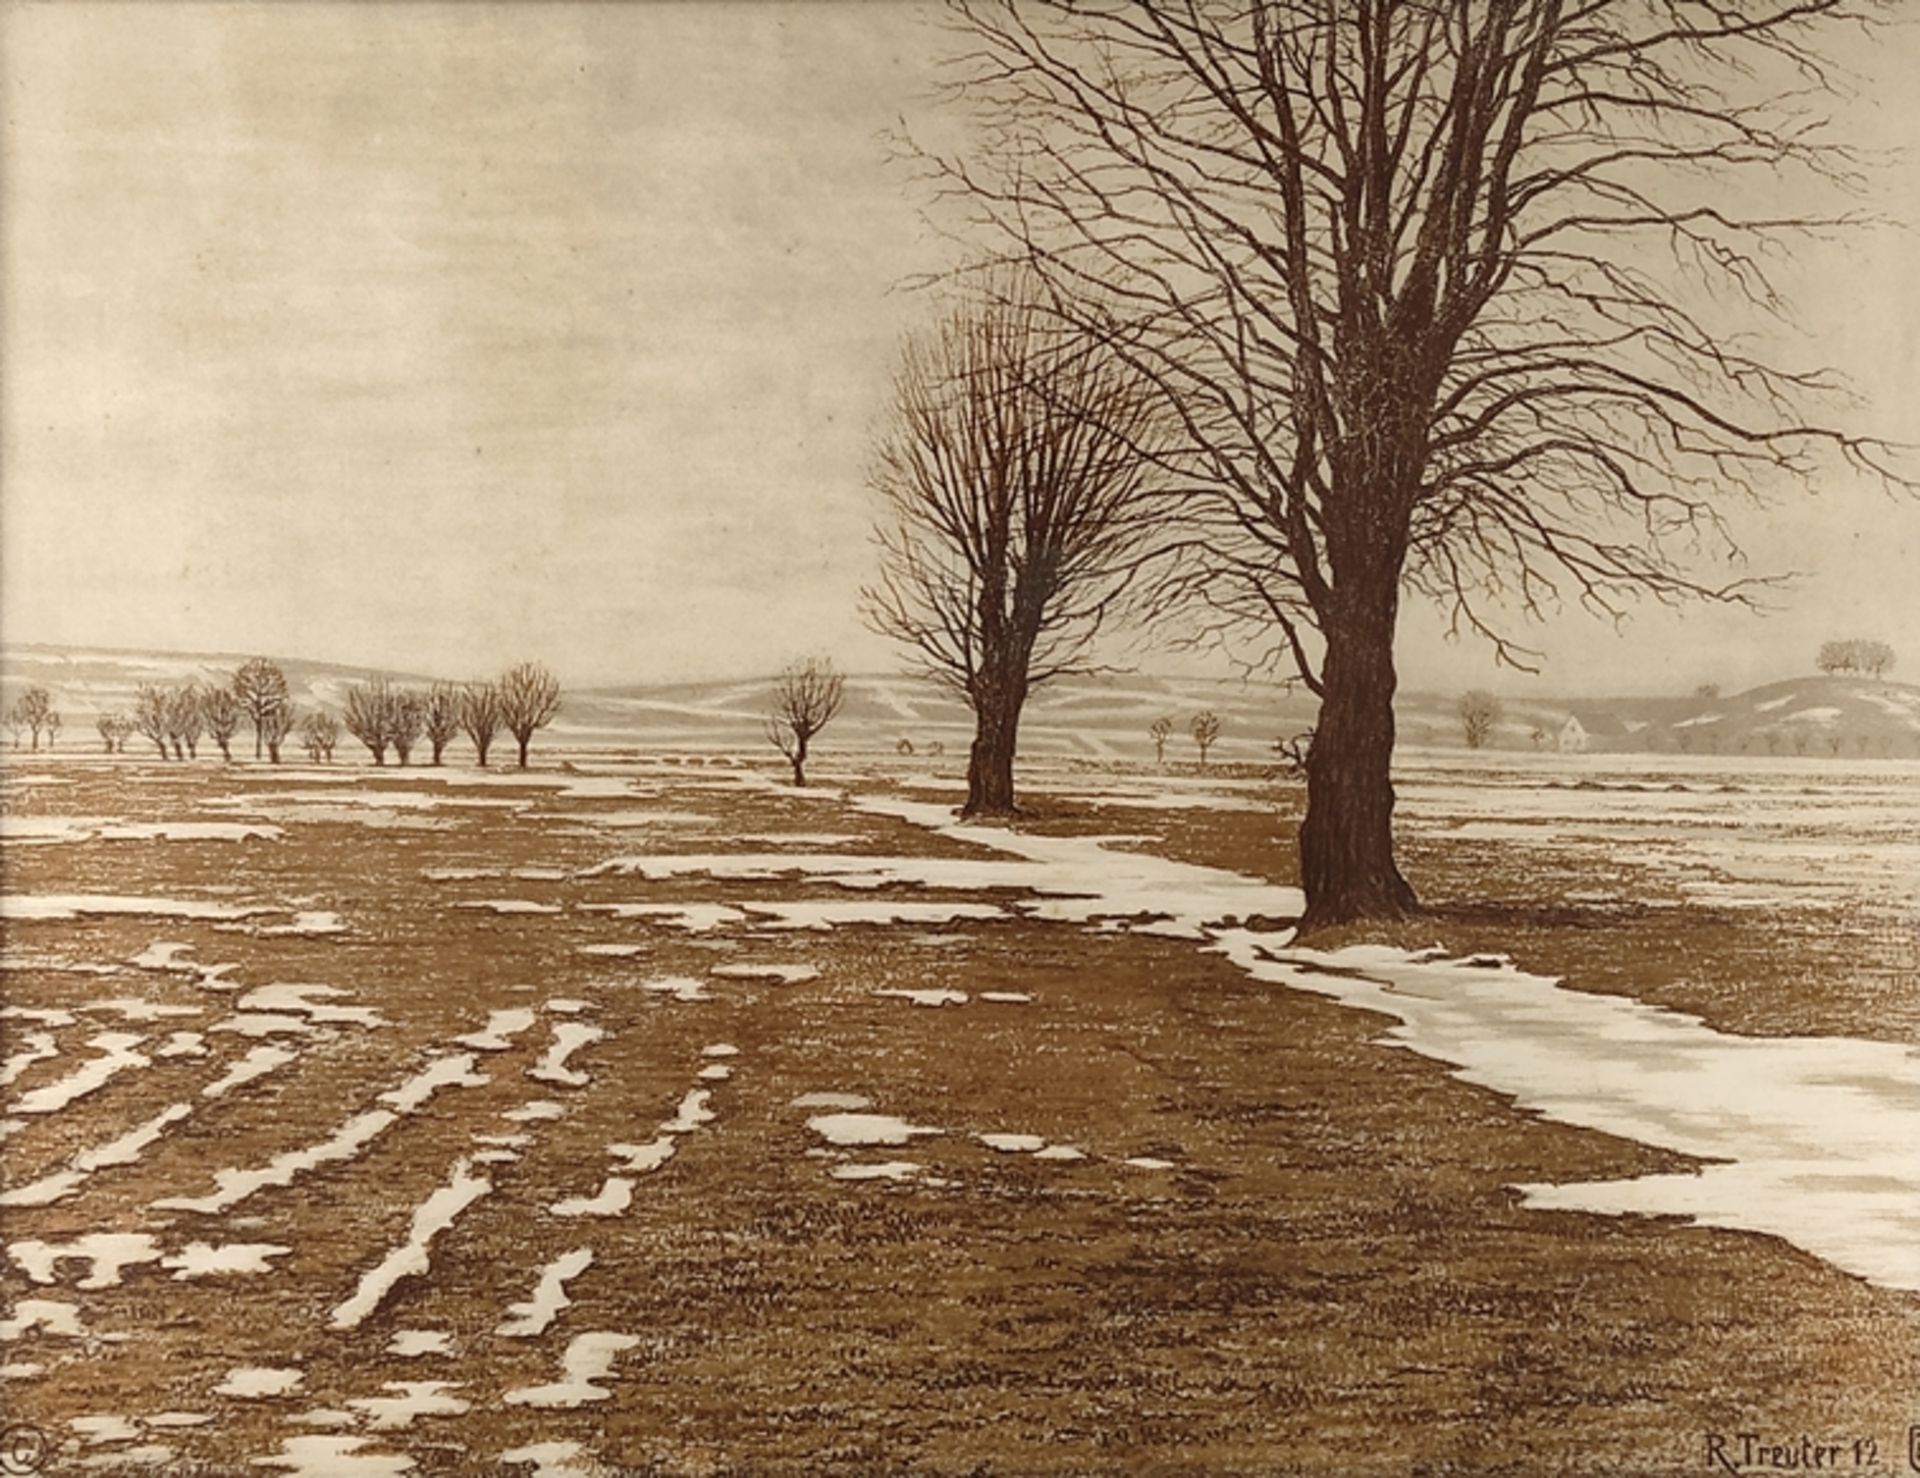 Treuter, Rudolf (1874 - 1950) "Last Snow", view of a field with isolated trees, signed, monogrammed